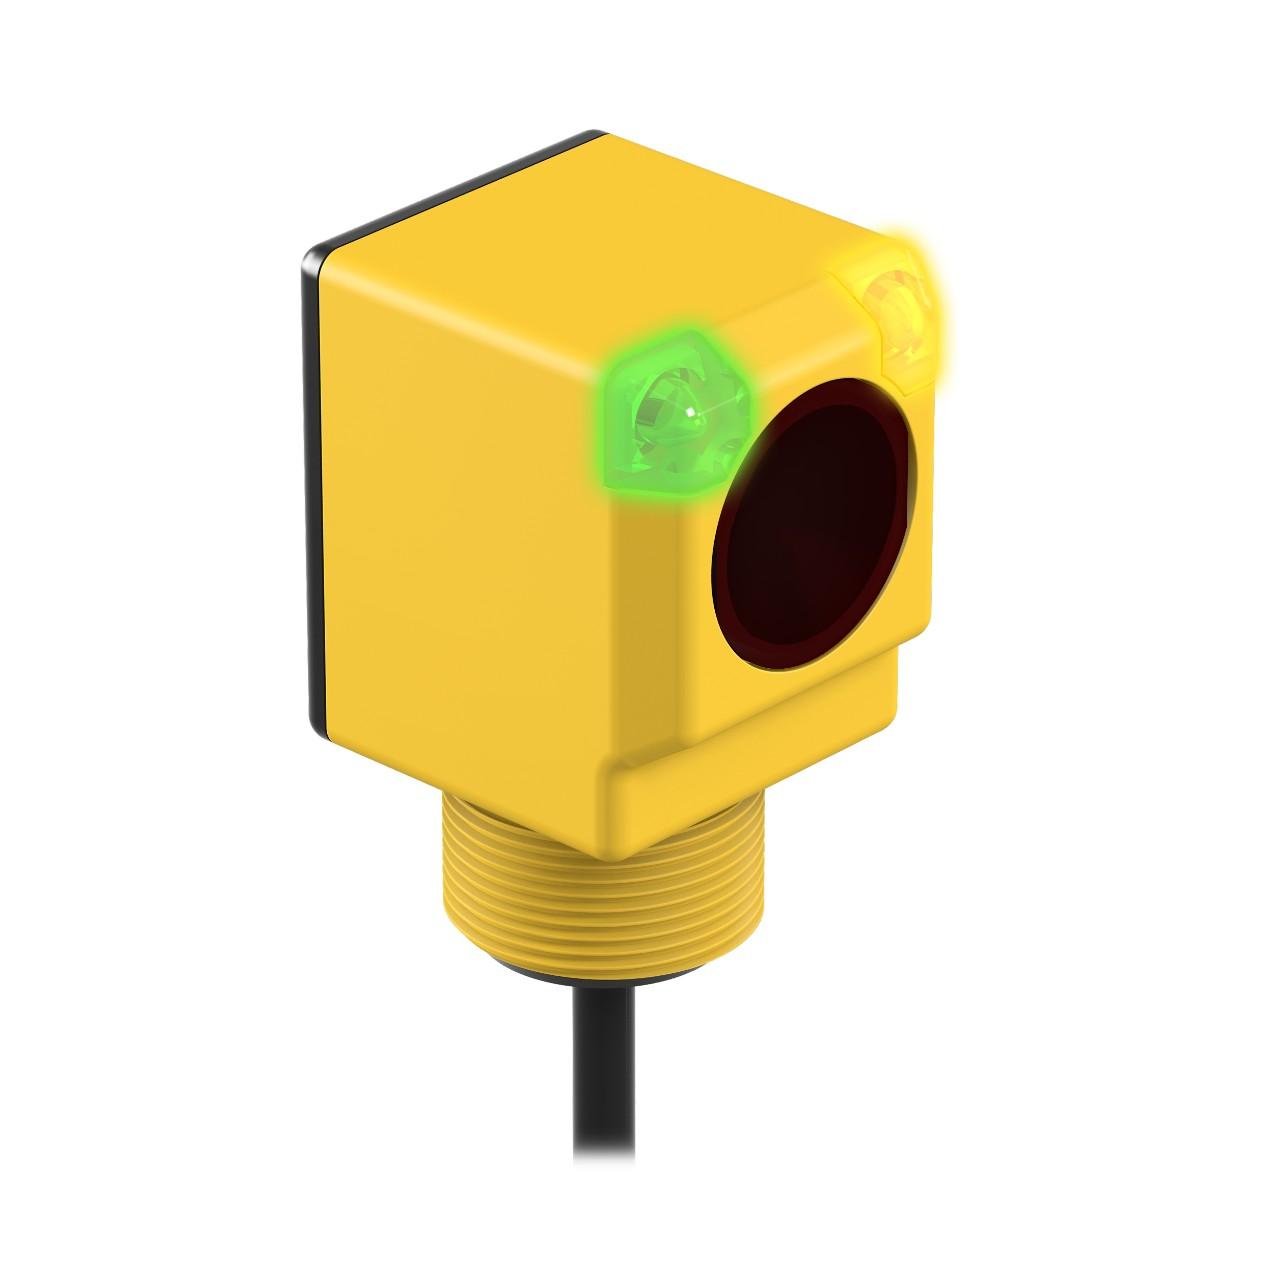 Banner Q406E Photo-electric emitter with through-beam system / opposed mode - Banner Engineering (EZ-BEAM series - Q40 AC series) - Part #32375 - Infrared (IR) light (950nm) - Supply voltage 10Vdc-30Vdc (12Vdc / 24Vdc nom.) - Pre-wired with 6.5ft / 2m cable terminated